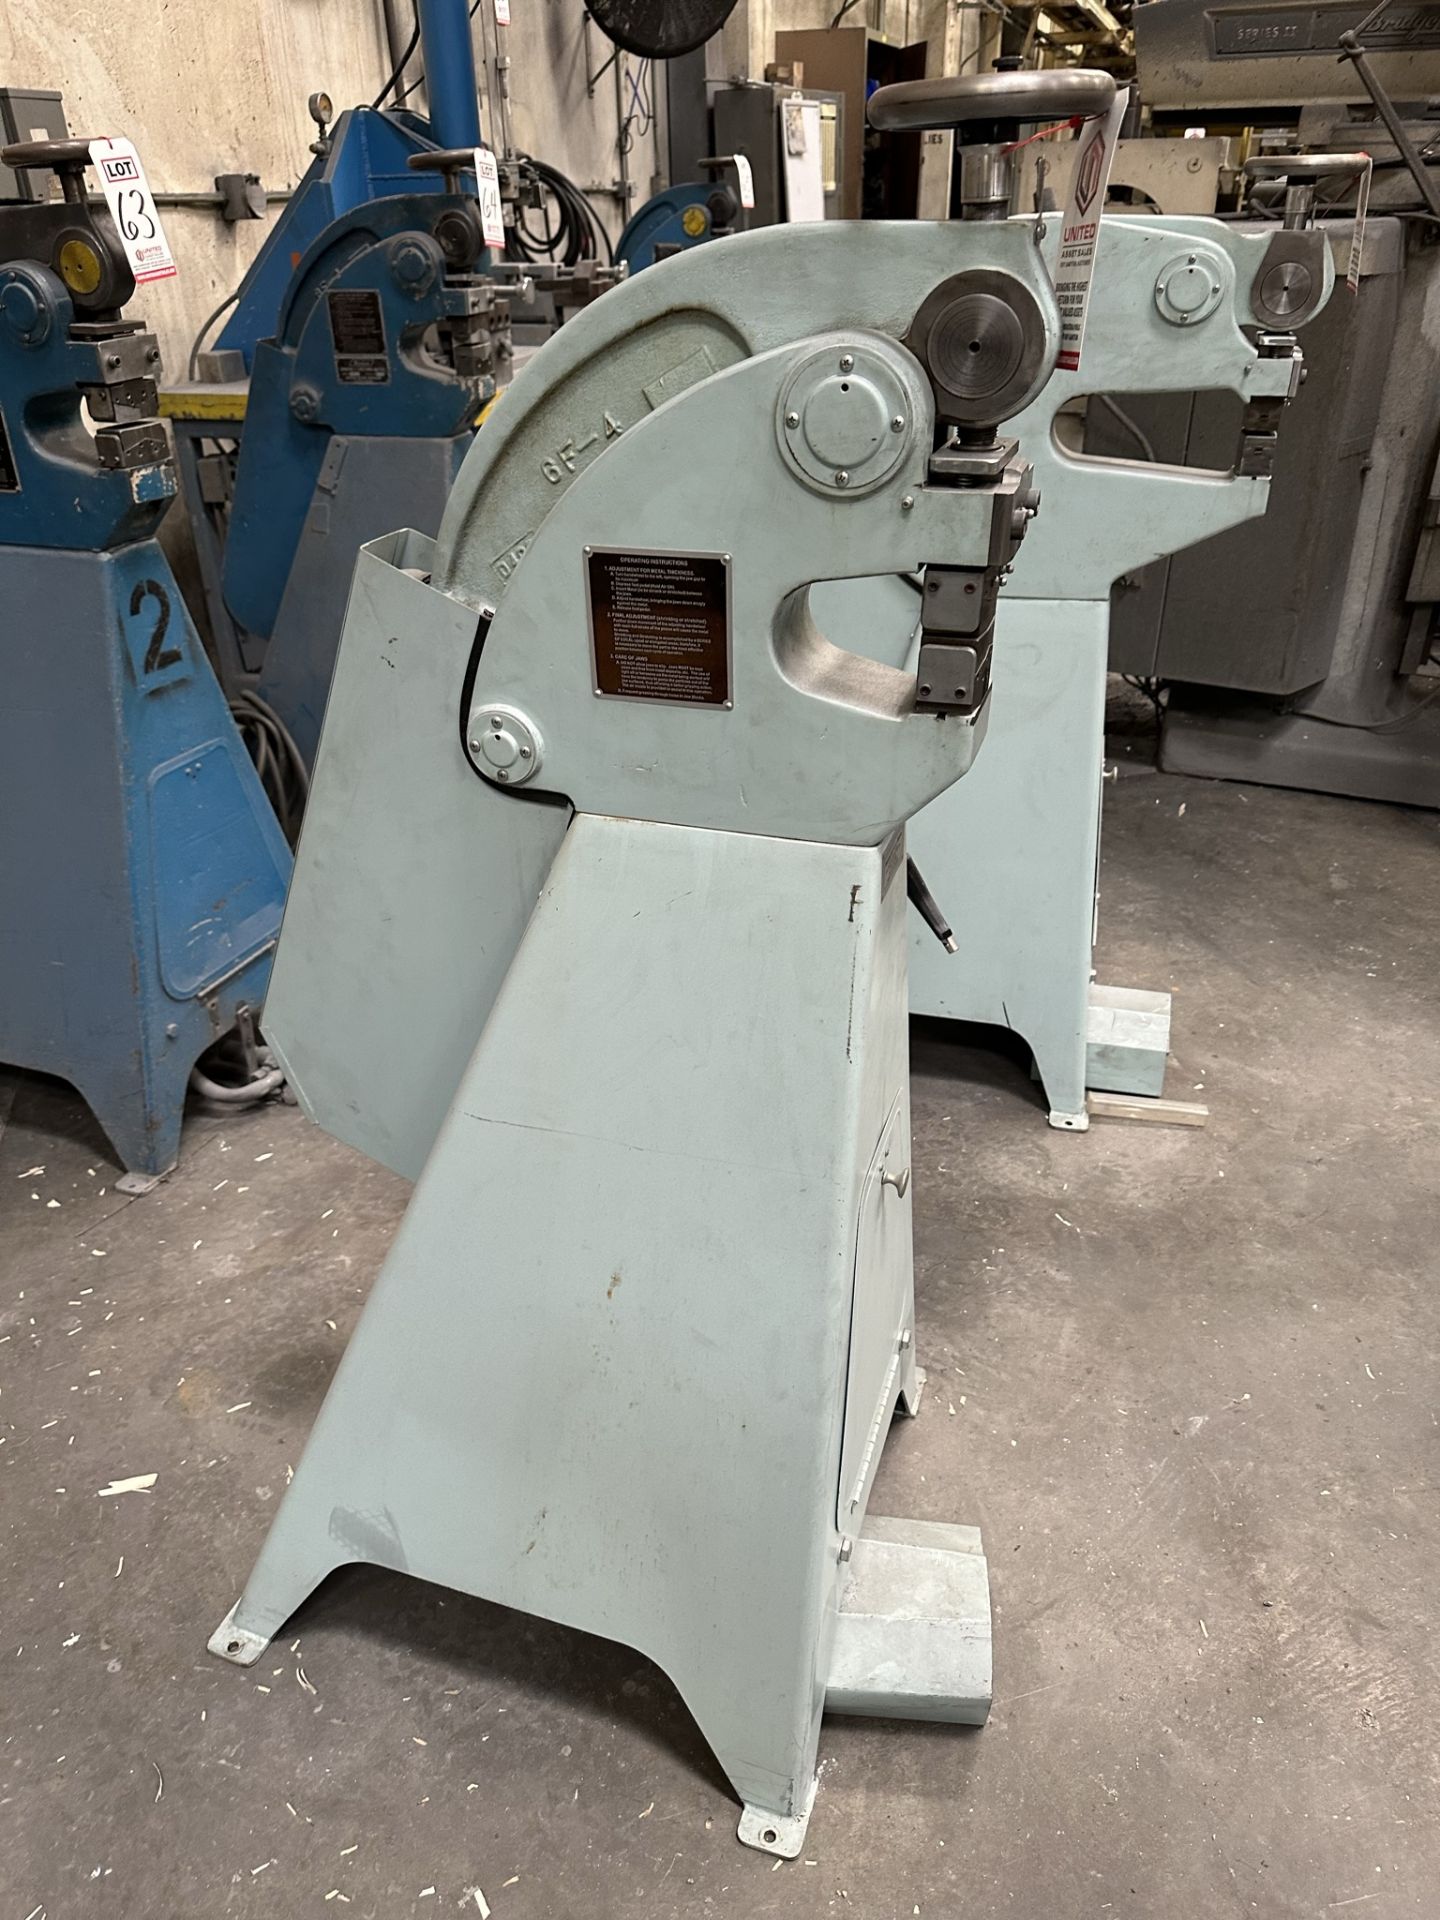 2019 MARCHANT MACHINE CORP SHRINKING AND STRETCHING MACHINE, MODEL 6A, S/N 382